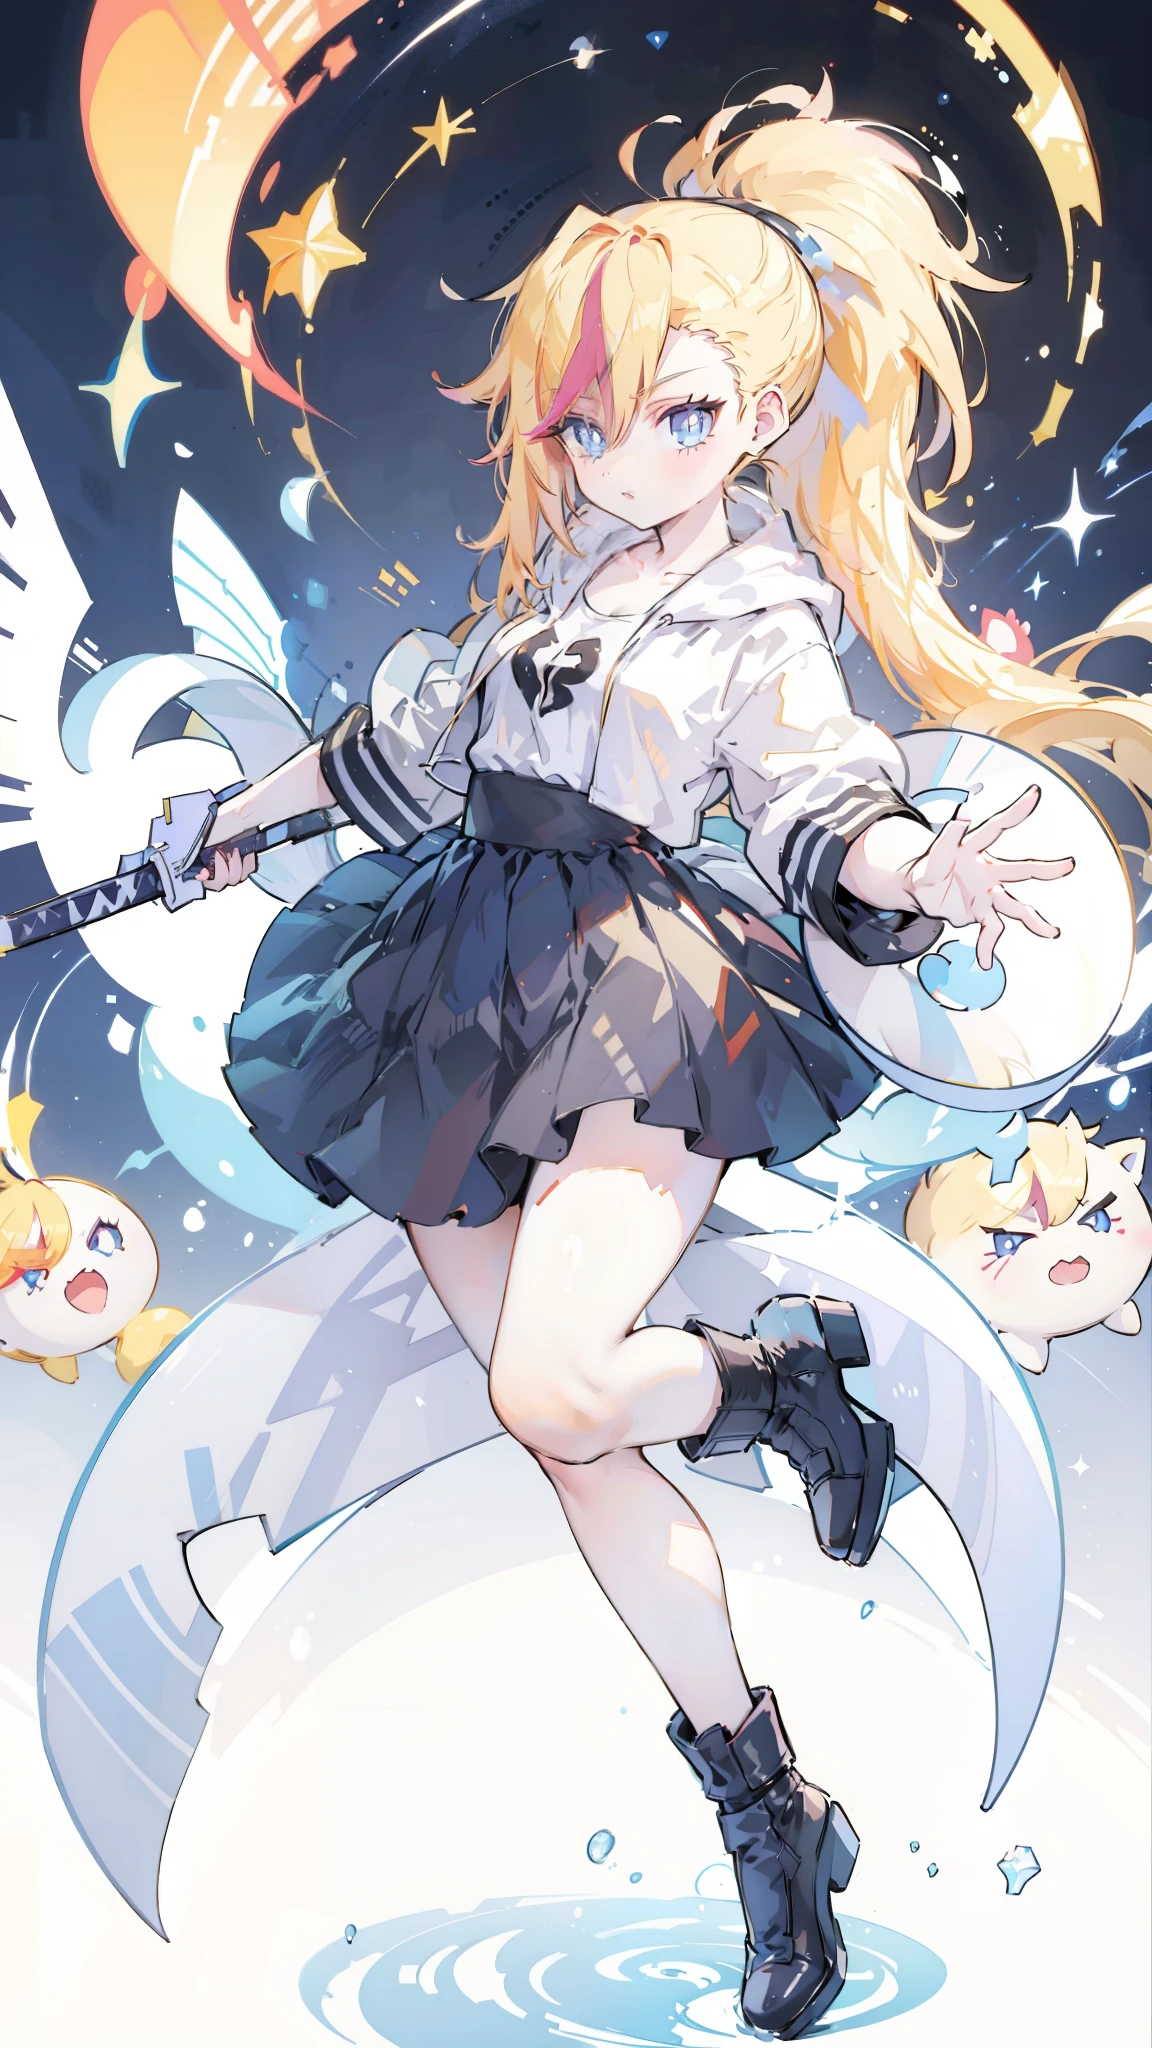 1 girl, ultra long hair, ultra detailed face, glowing lips, glowing blue eyes, very long ponytail, elegant walk, catwalk, holding down a  giant katana, blonde, long eyelashes, long boots , looking to the sky, starry sky, a ultra giant katana 